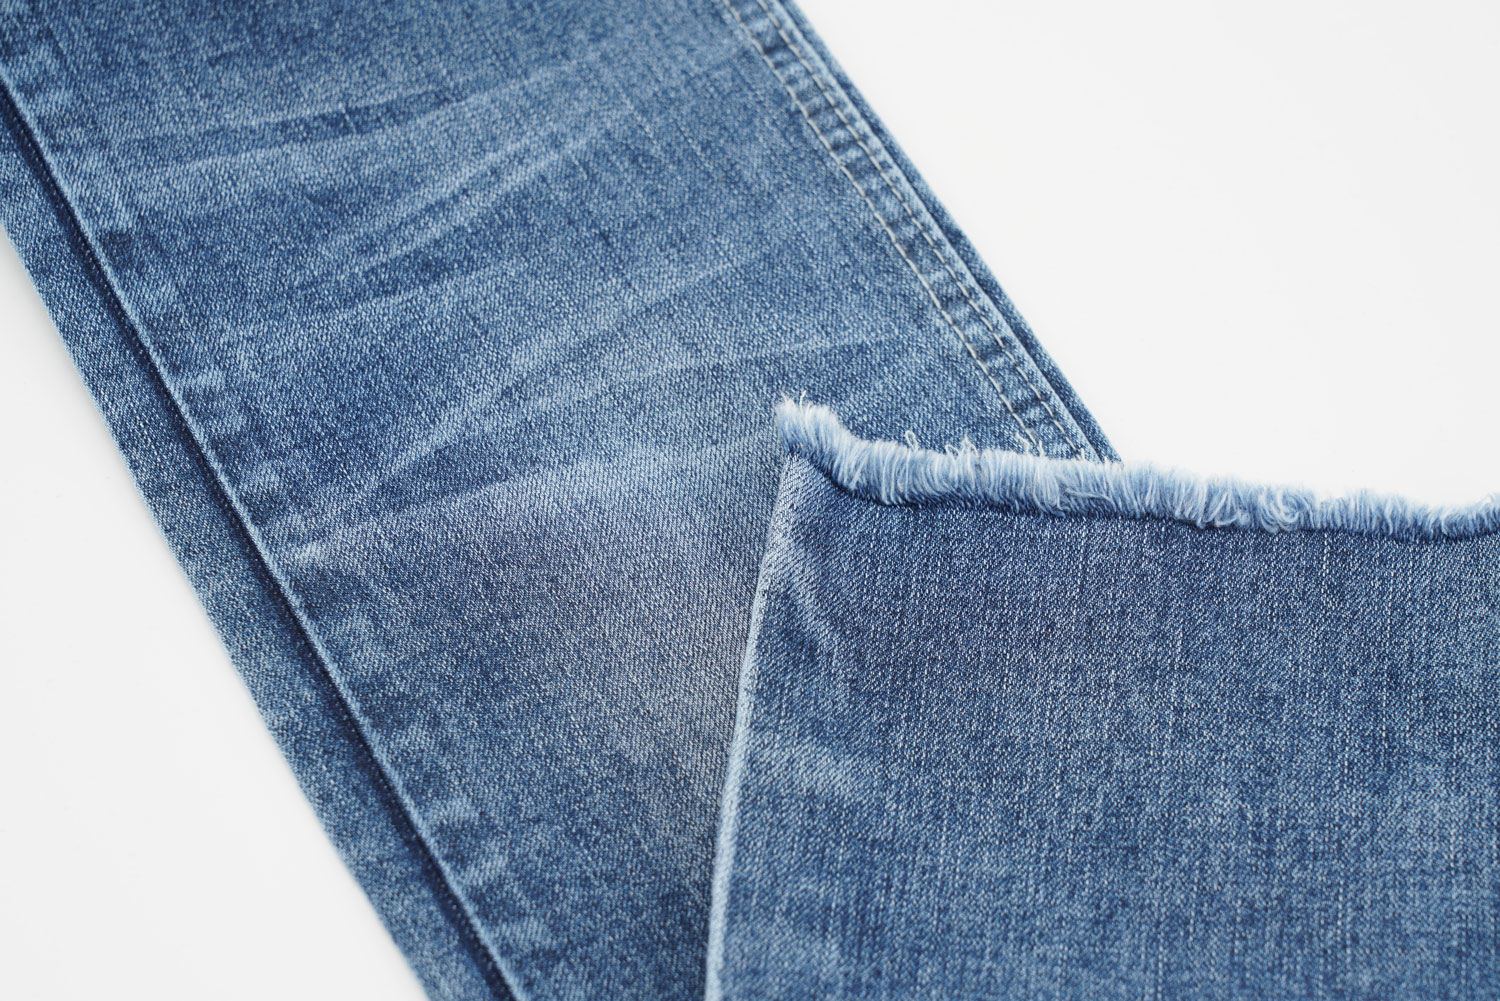 Denim Fabric Manufacturers in China: Are They Worth It? 1